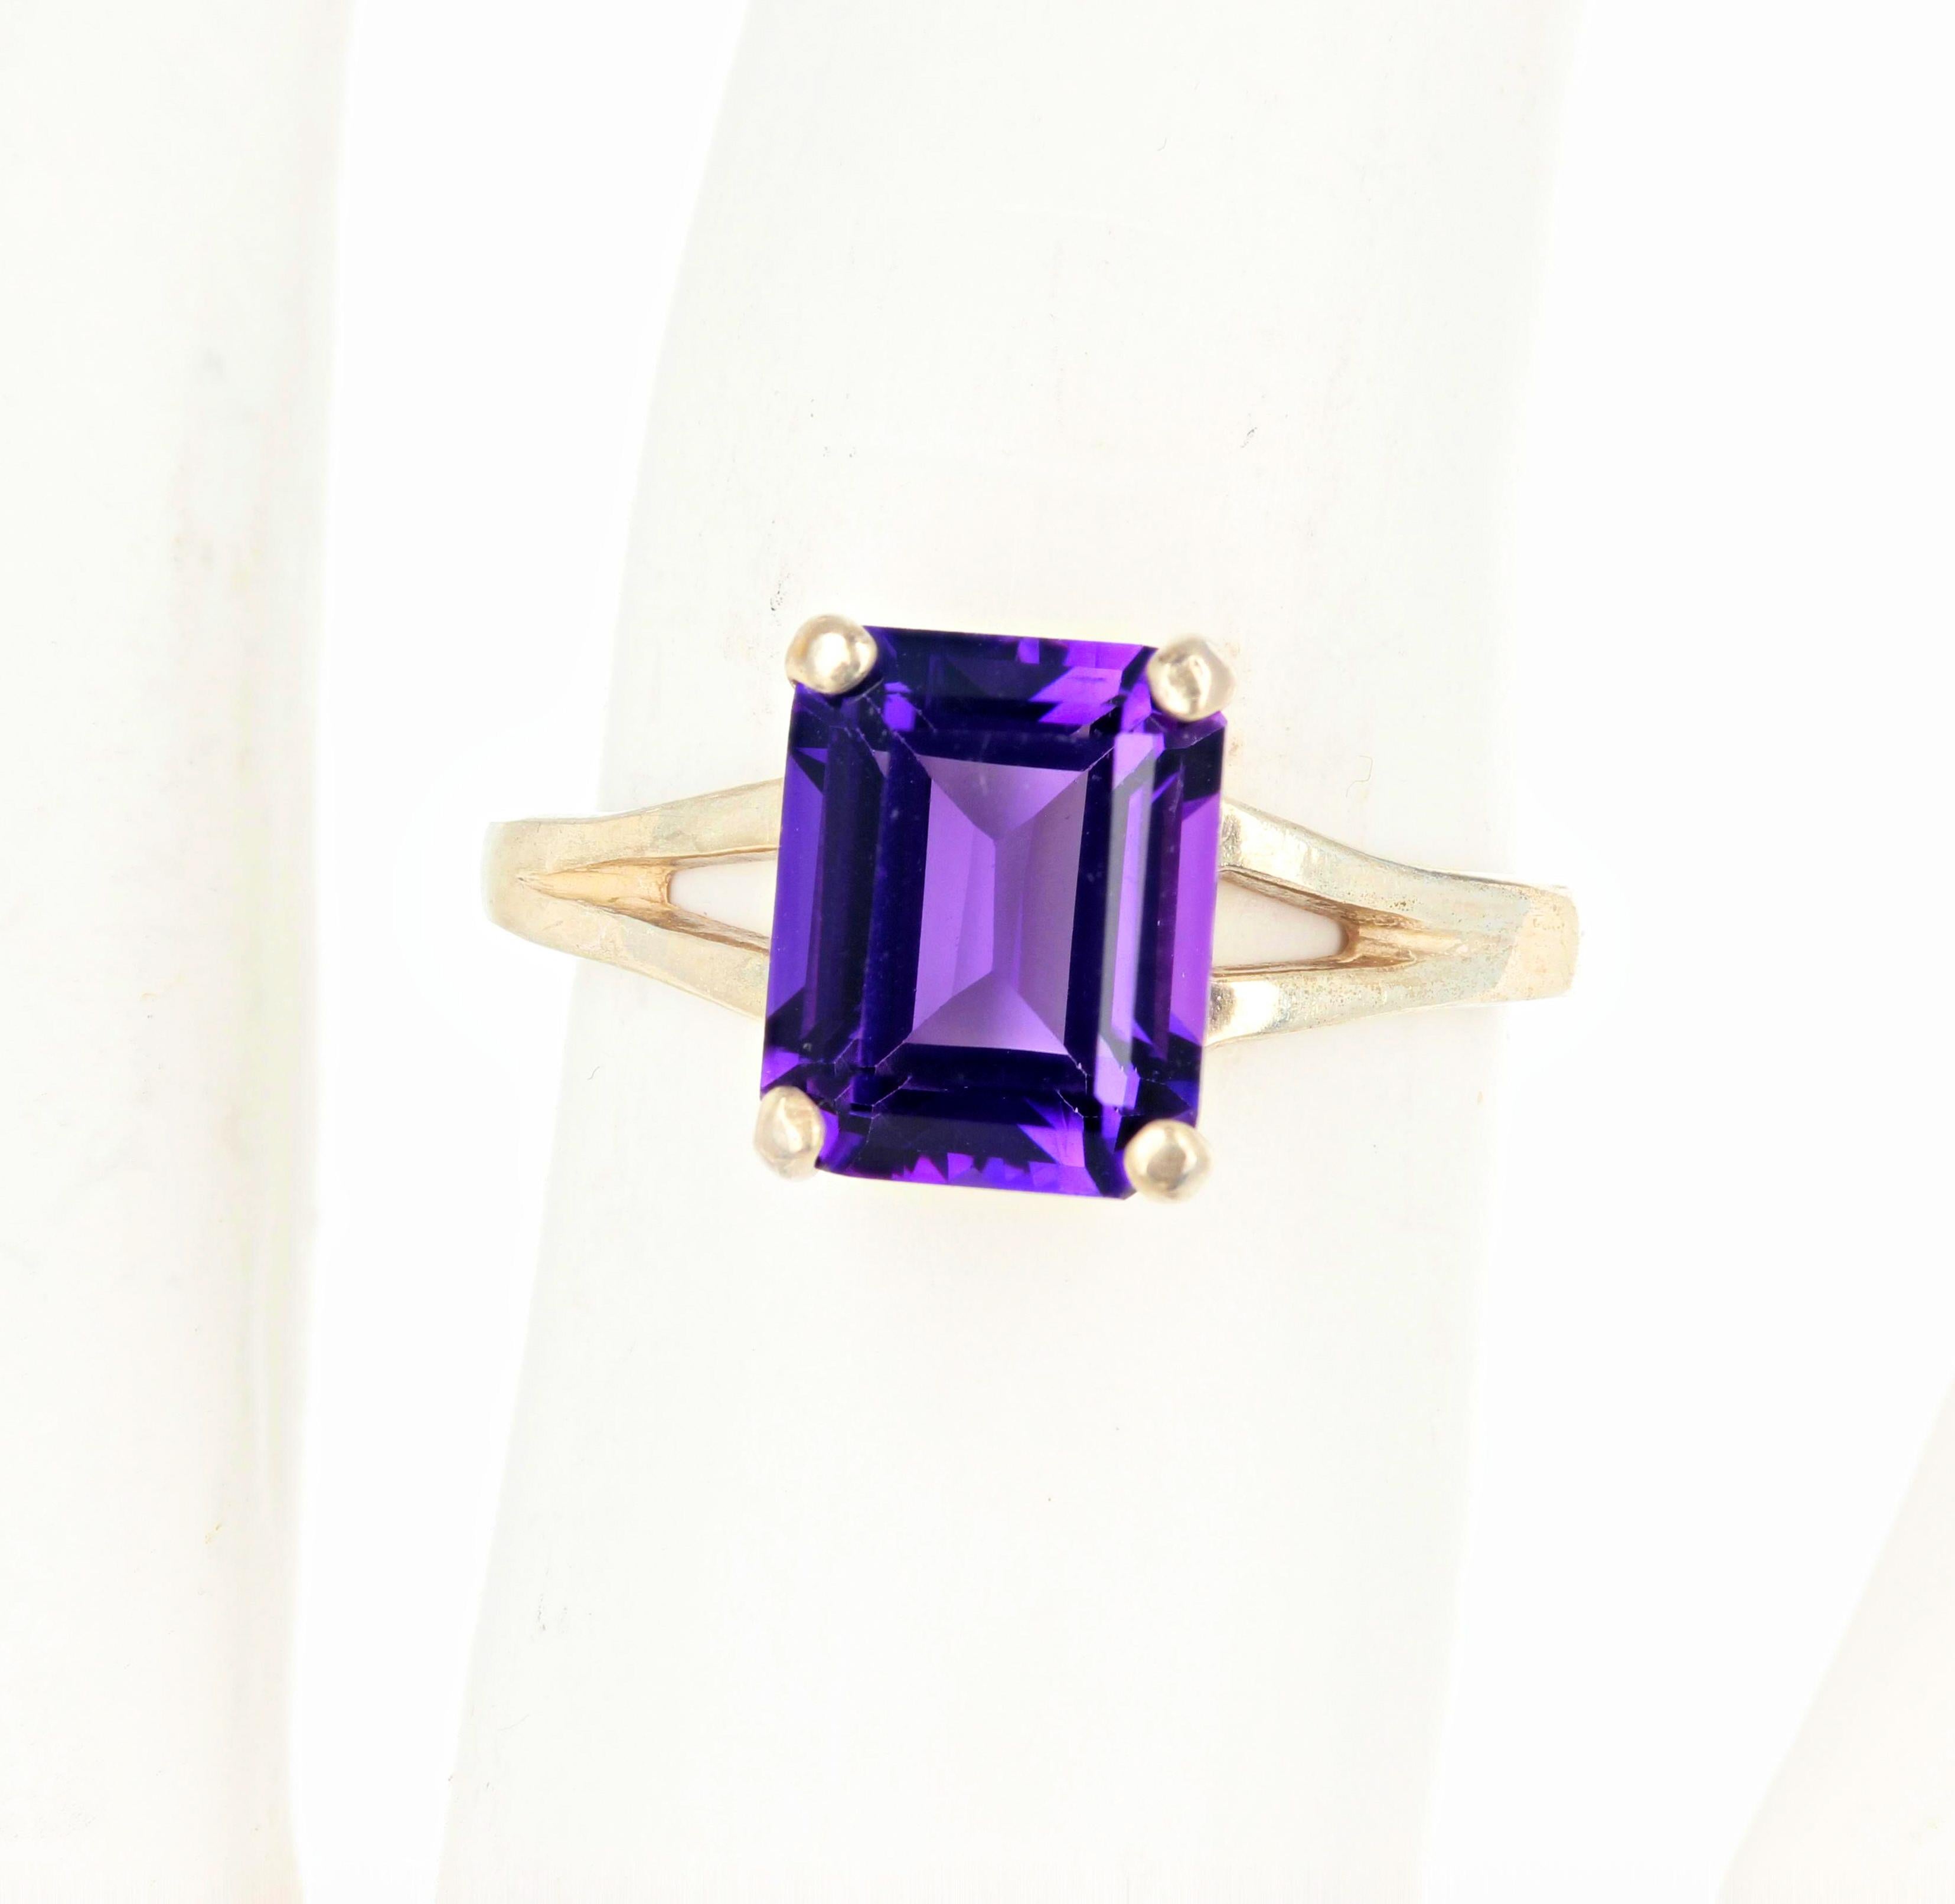 Absolutely glittering brilliant 1.4 carat natural purple Amethyst set in a sterling silver ring size 6.5 sizable.   It measures 9mm x 7mm approximately.  The spectacular optical effect in the Amethyst exhibits pinkypurple reflections and fire